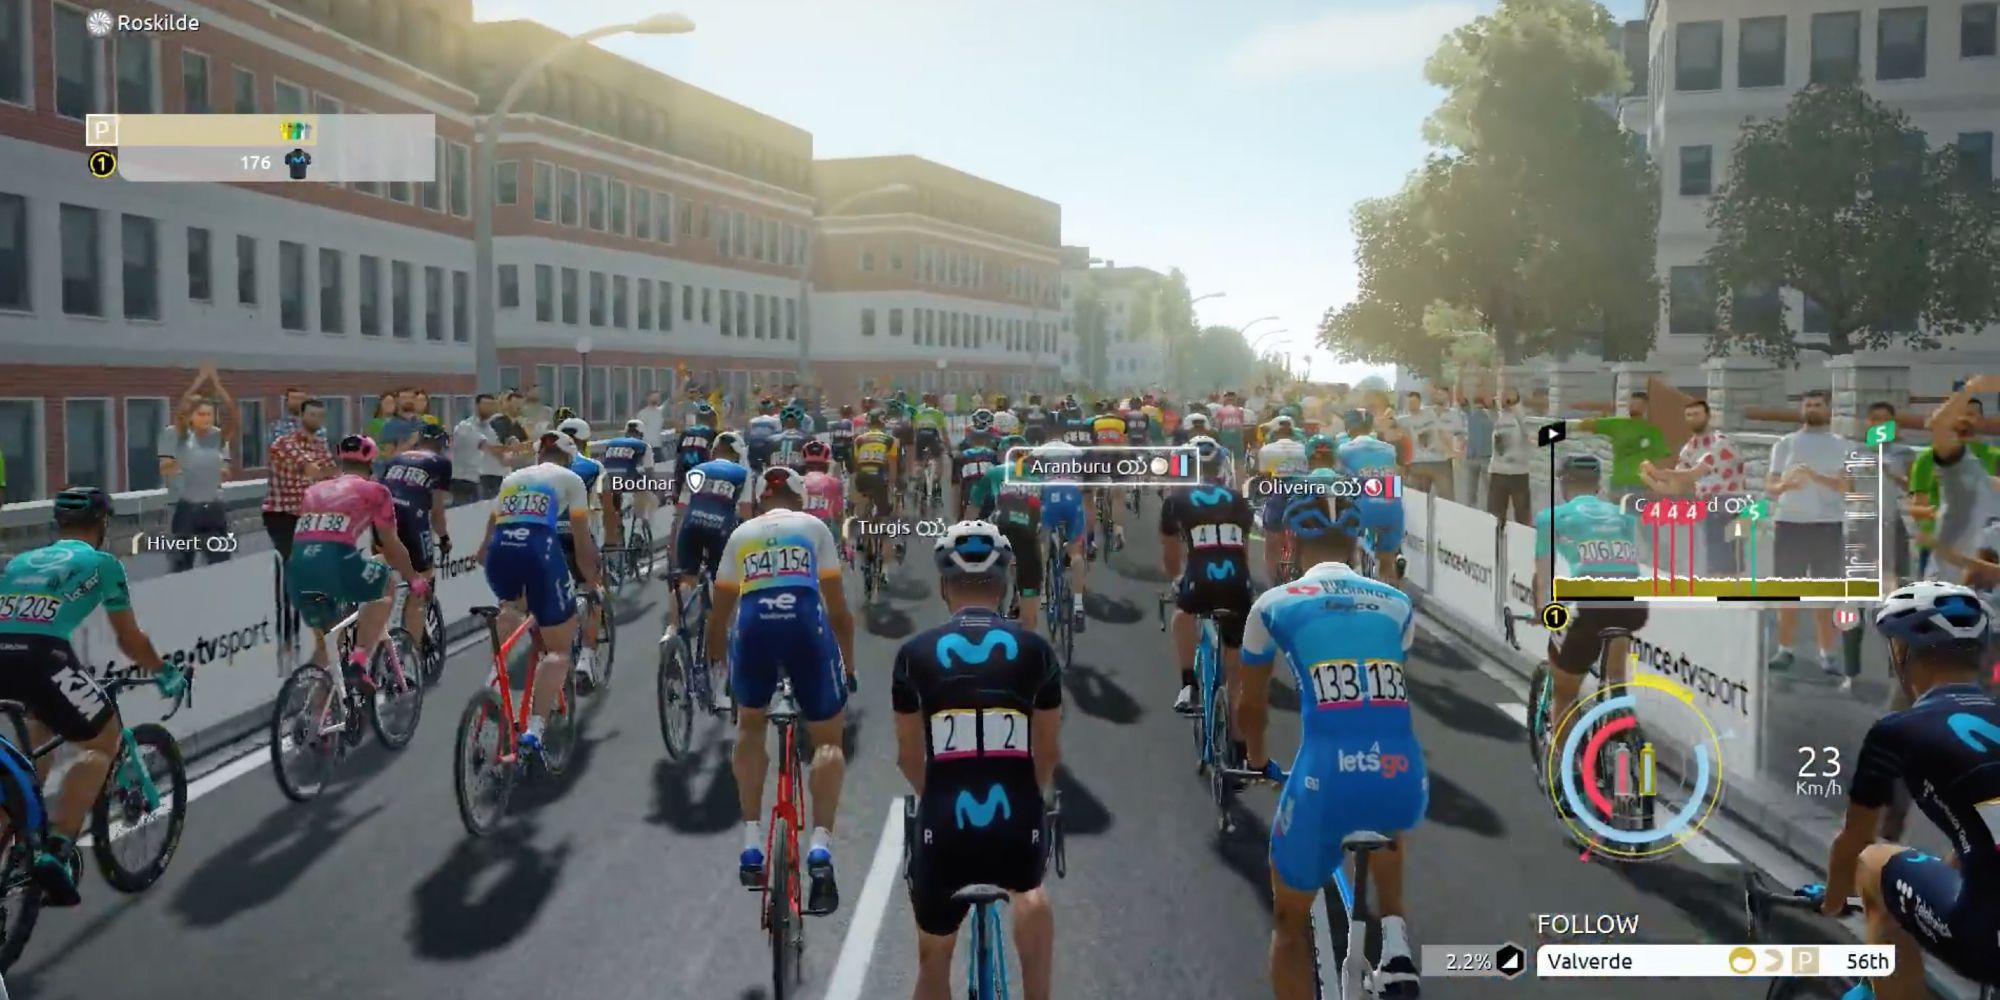 Tour de France 2022 - Start slow - Player moves along with the team at the starting line